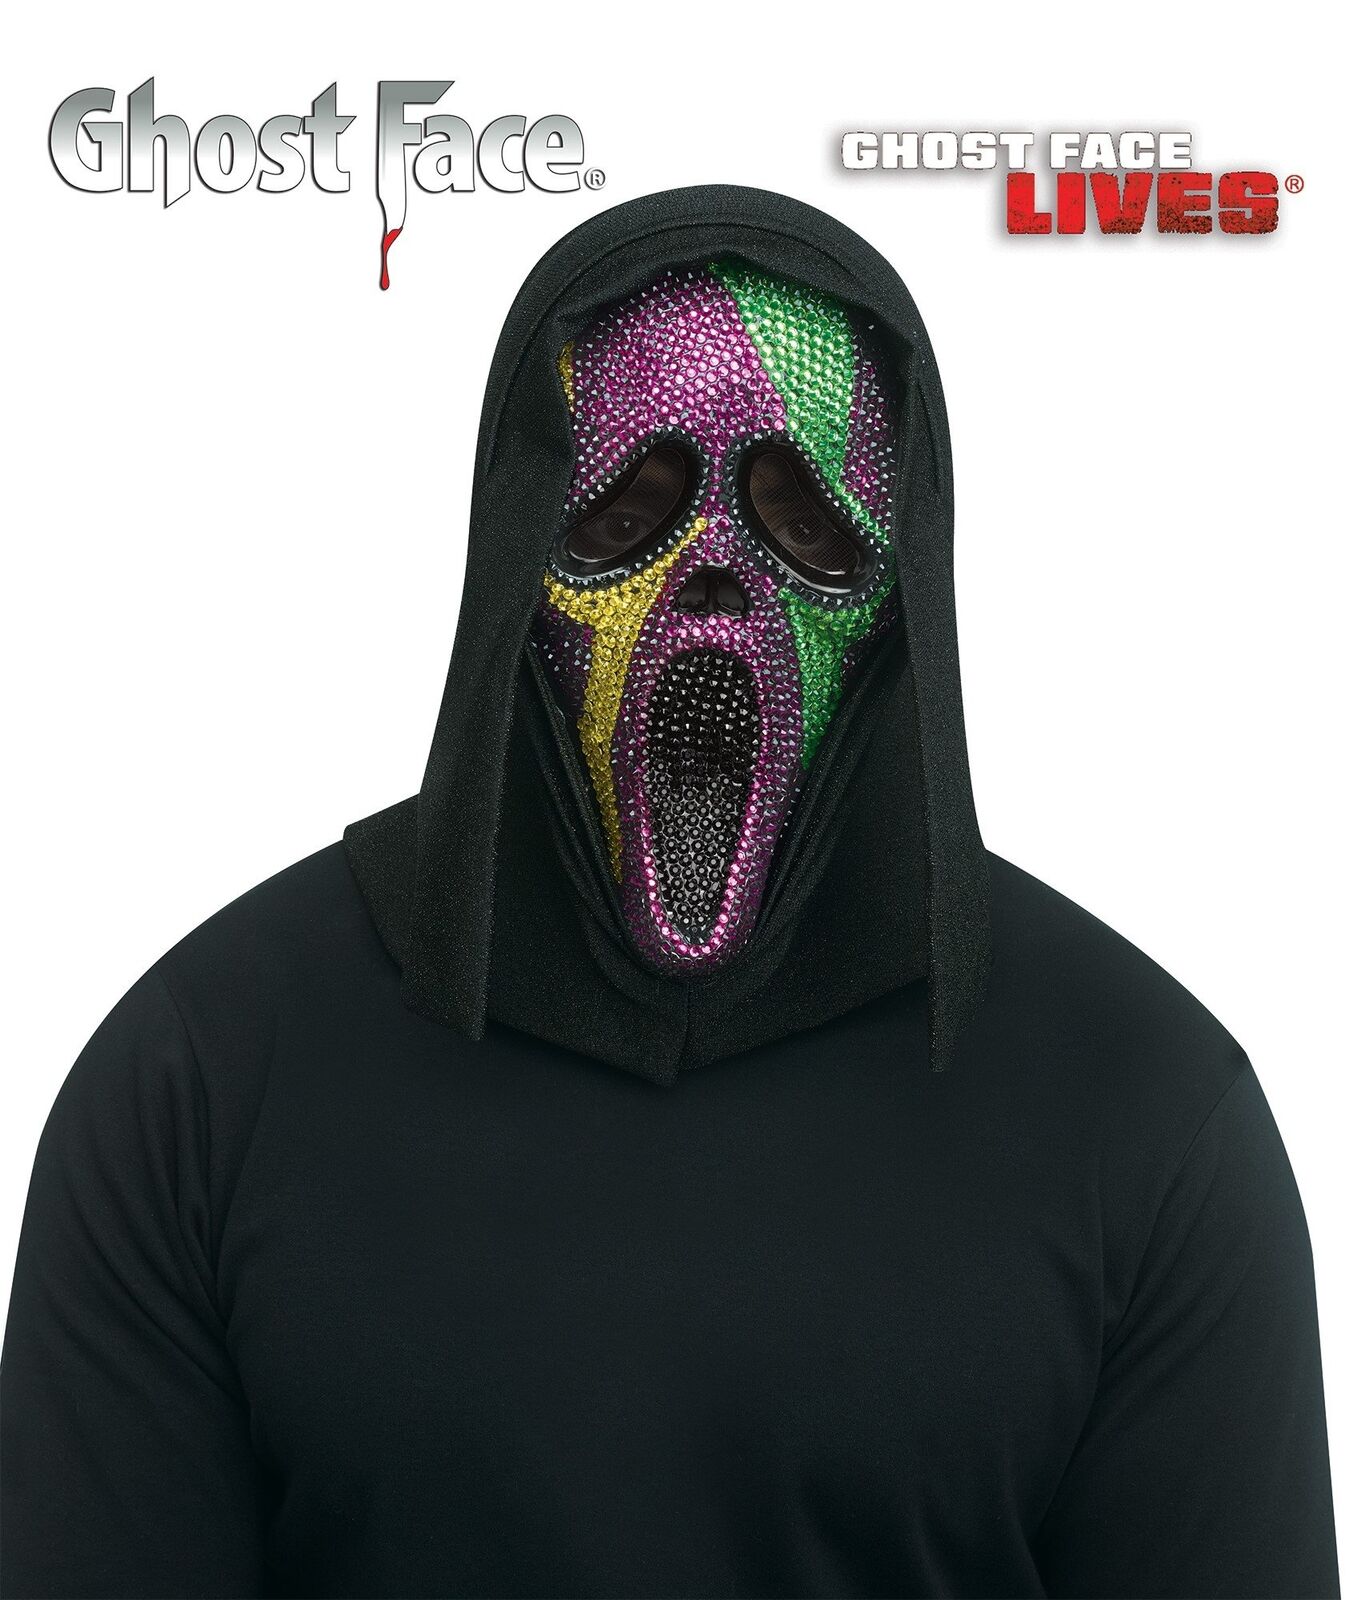 Ghost Face Scream Mask with Mardi Gras Bling - Purple, Green, Gold...